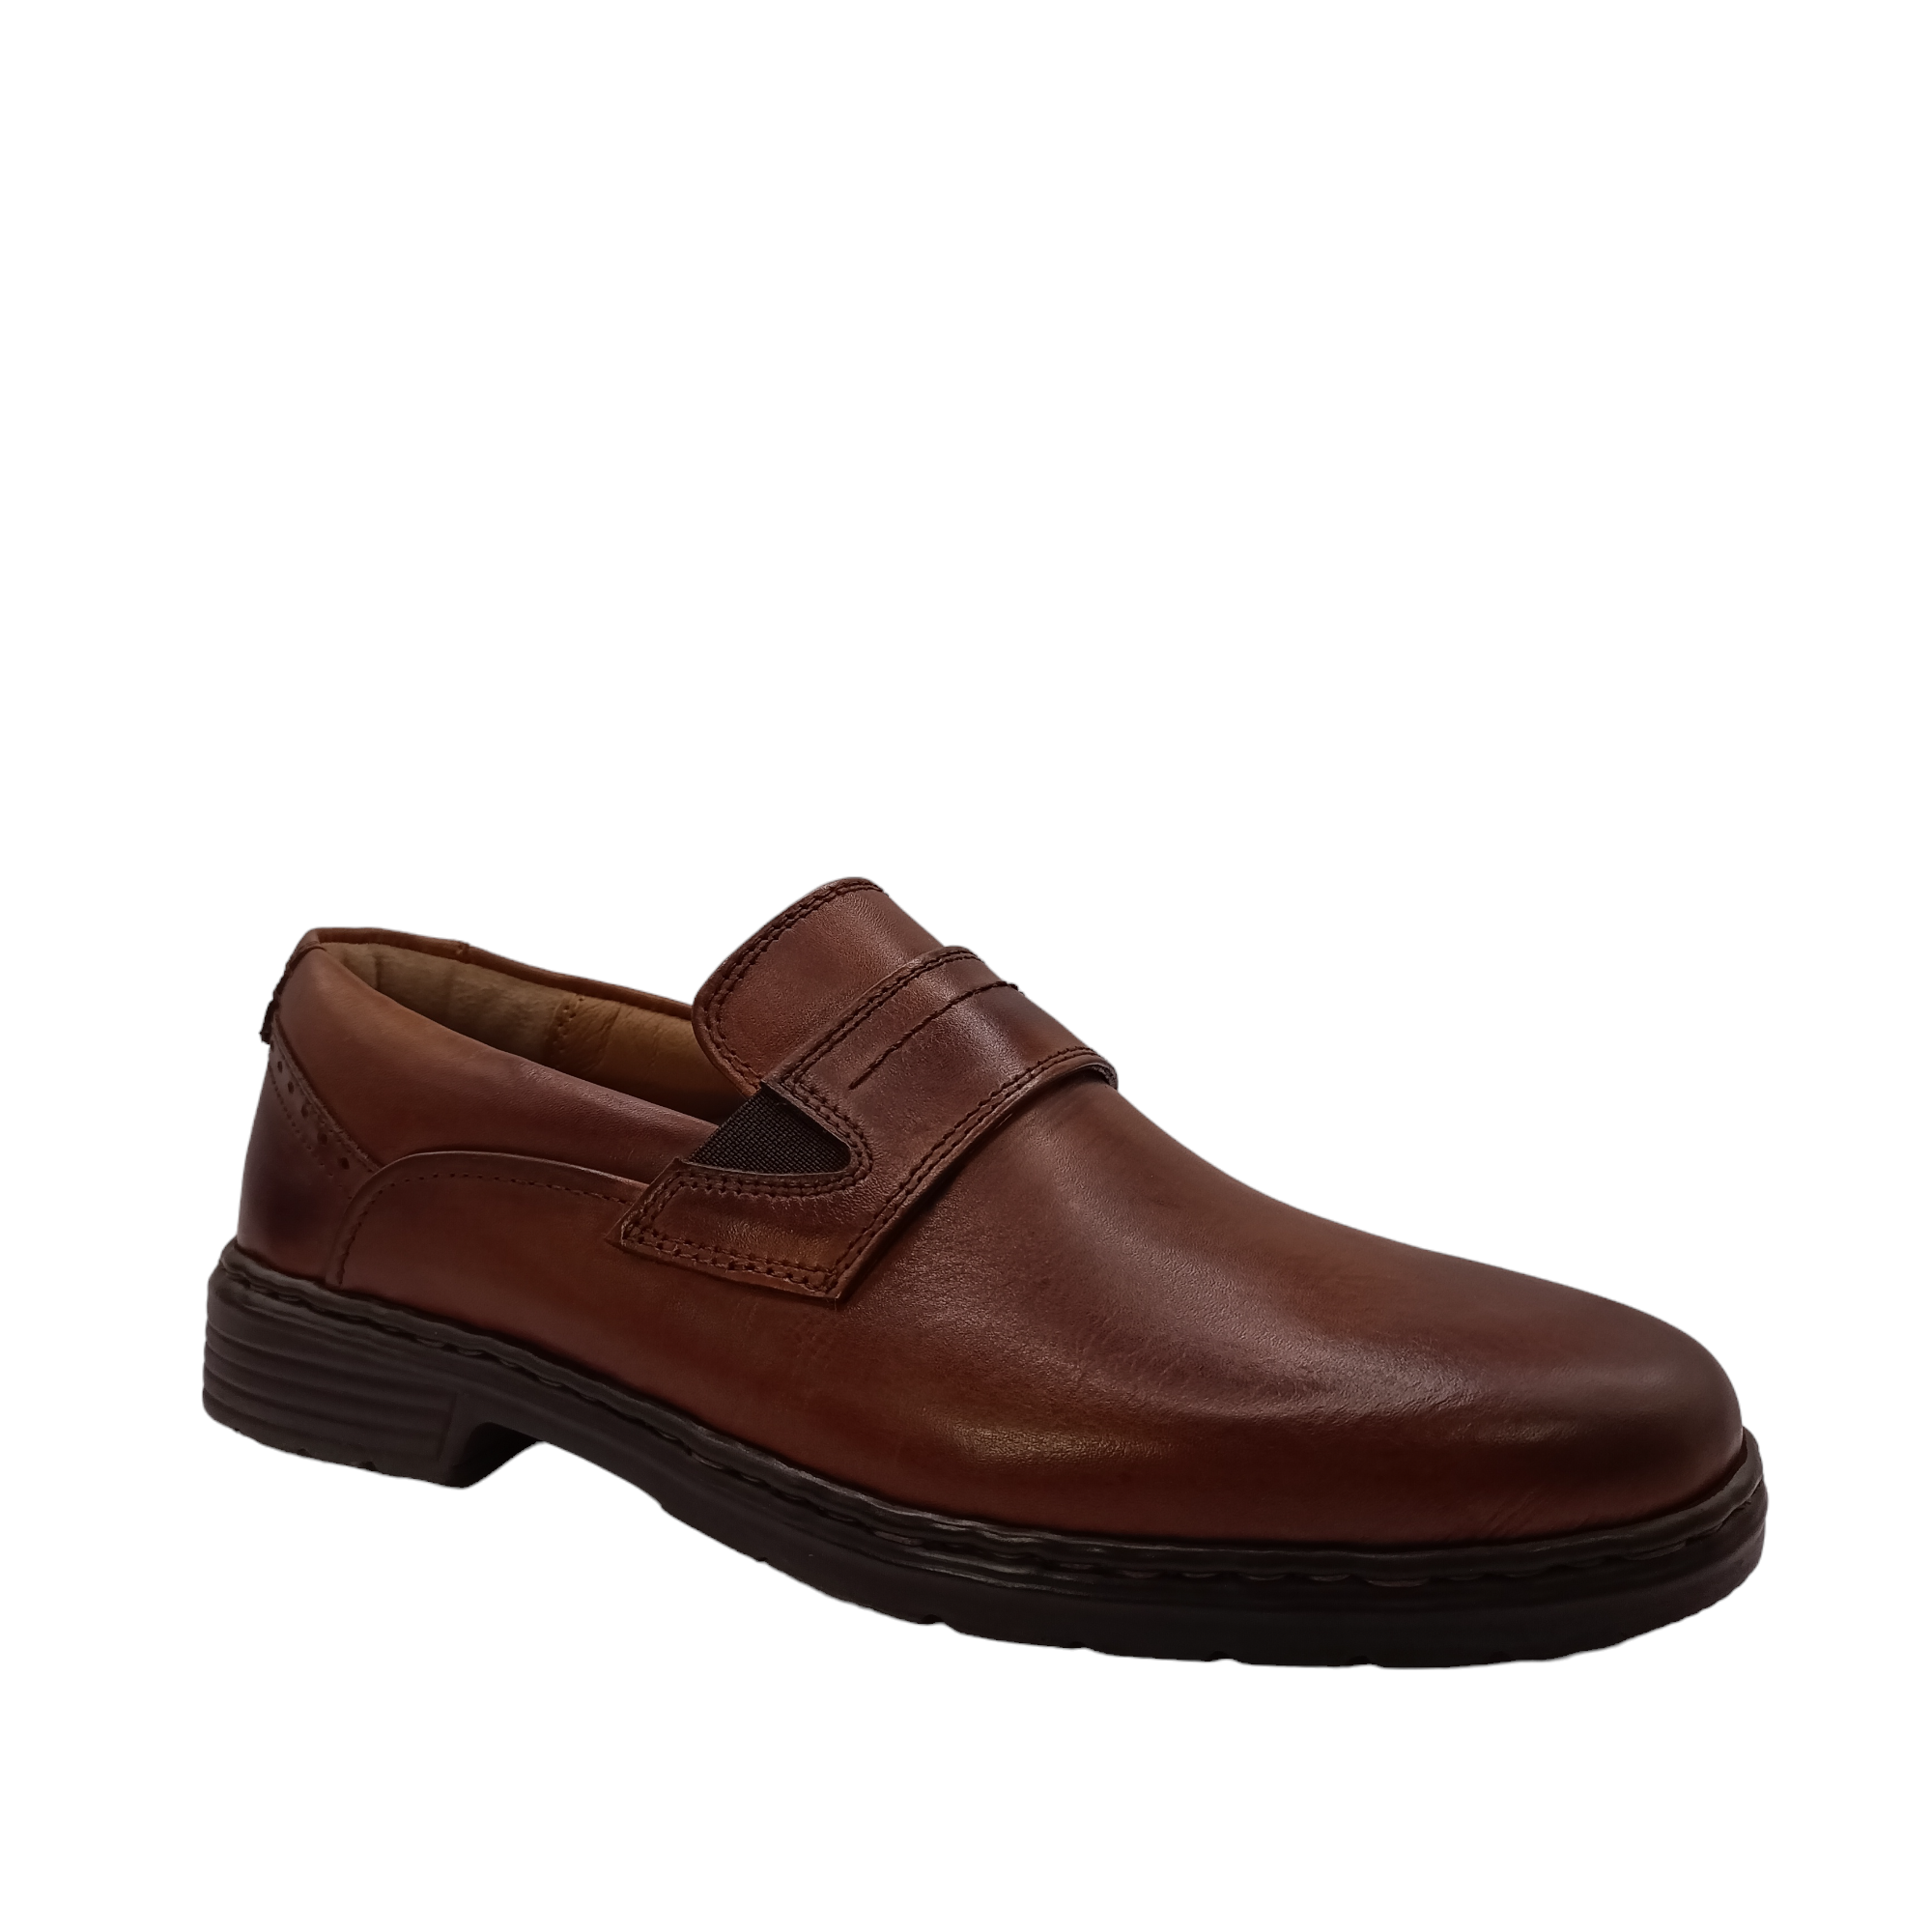 Shop Alastair 15 Josef Seibel - with shoe&amp;me - from Josef Seibel - Shoes - Mens, Shoe, Winter - [collection]